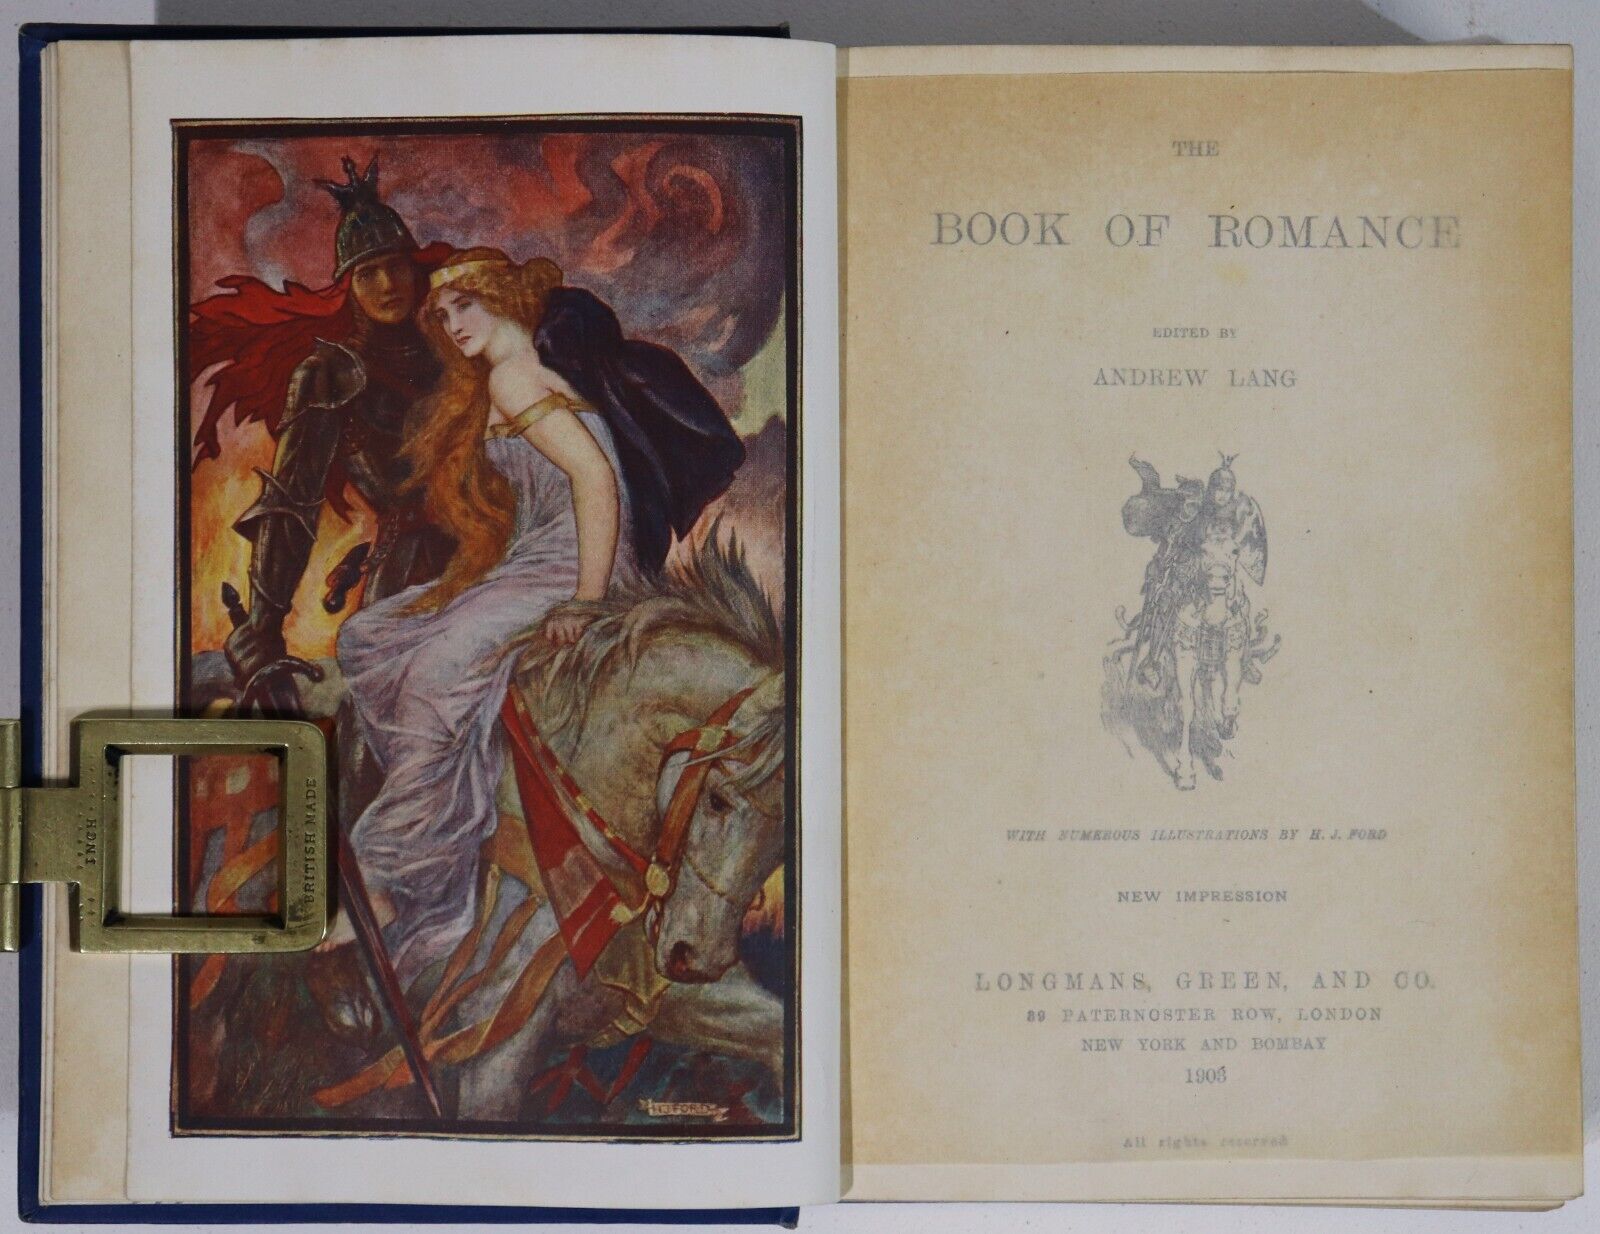 1903 The Book Of Romance by Andrew Lang Antique Romantic Literature Book - 0